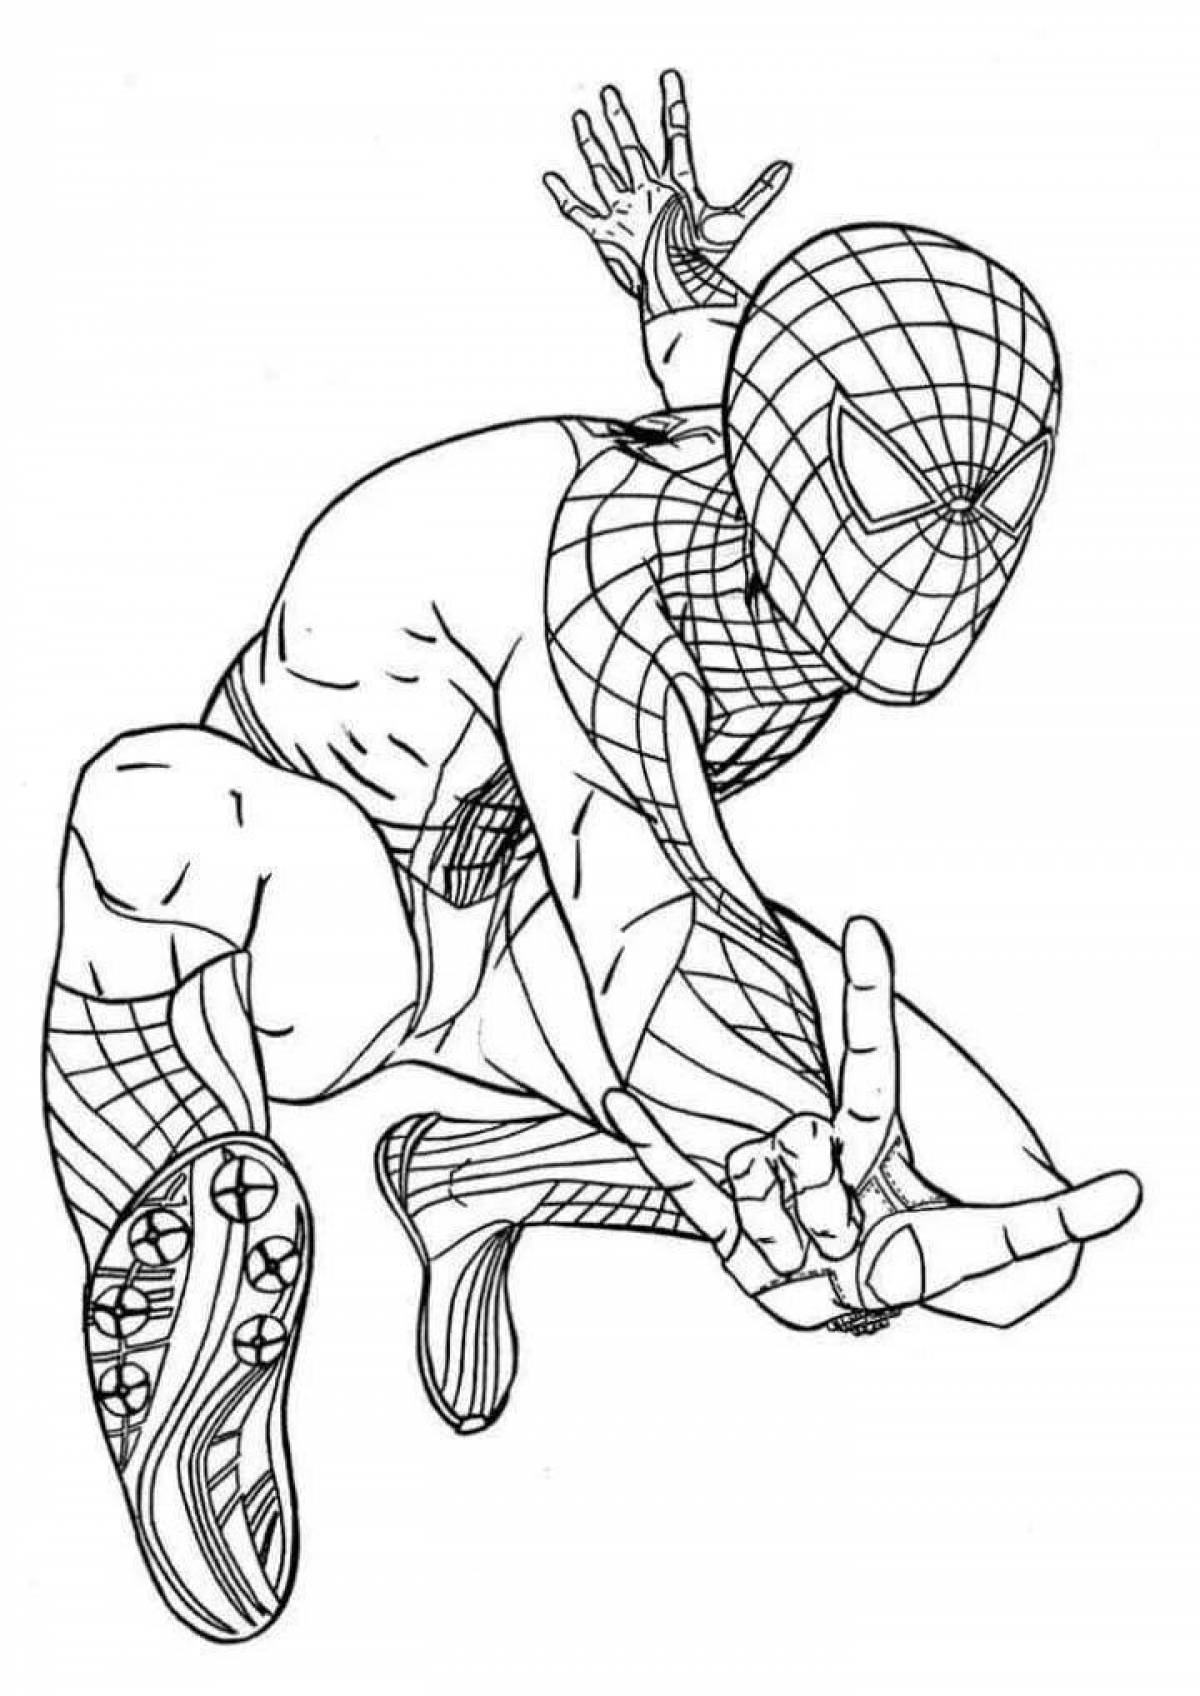 Fabulous Spiderman coloring book for kids 6-7 years old